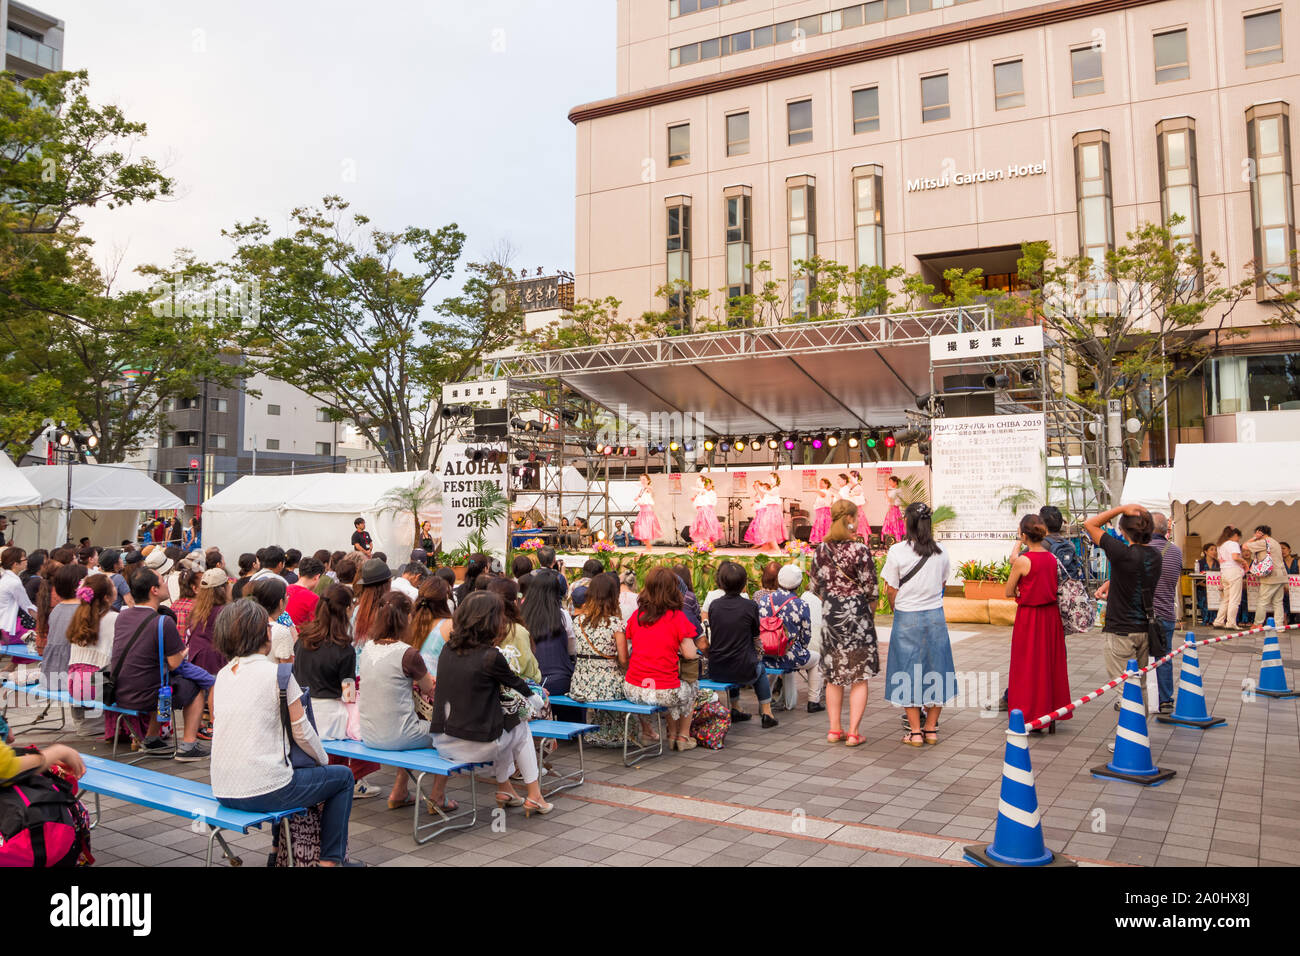 Chiba, Japan, 09/16/2019 , Aloha festival in Chiba central park on summer 2019. Performers are dancing a traditional hawaiian dance for free to promot Stock Photo